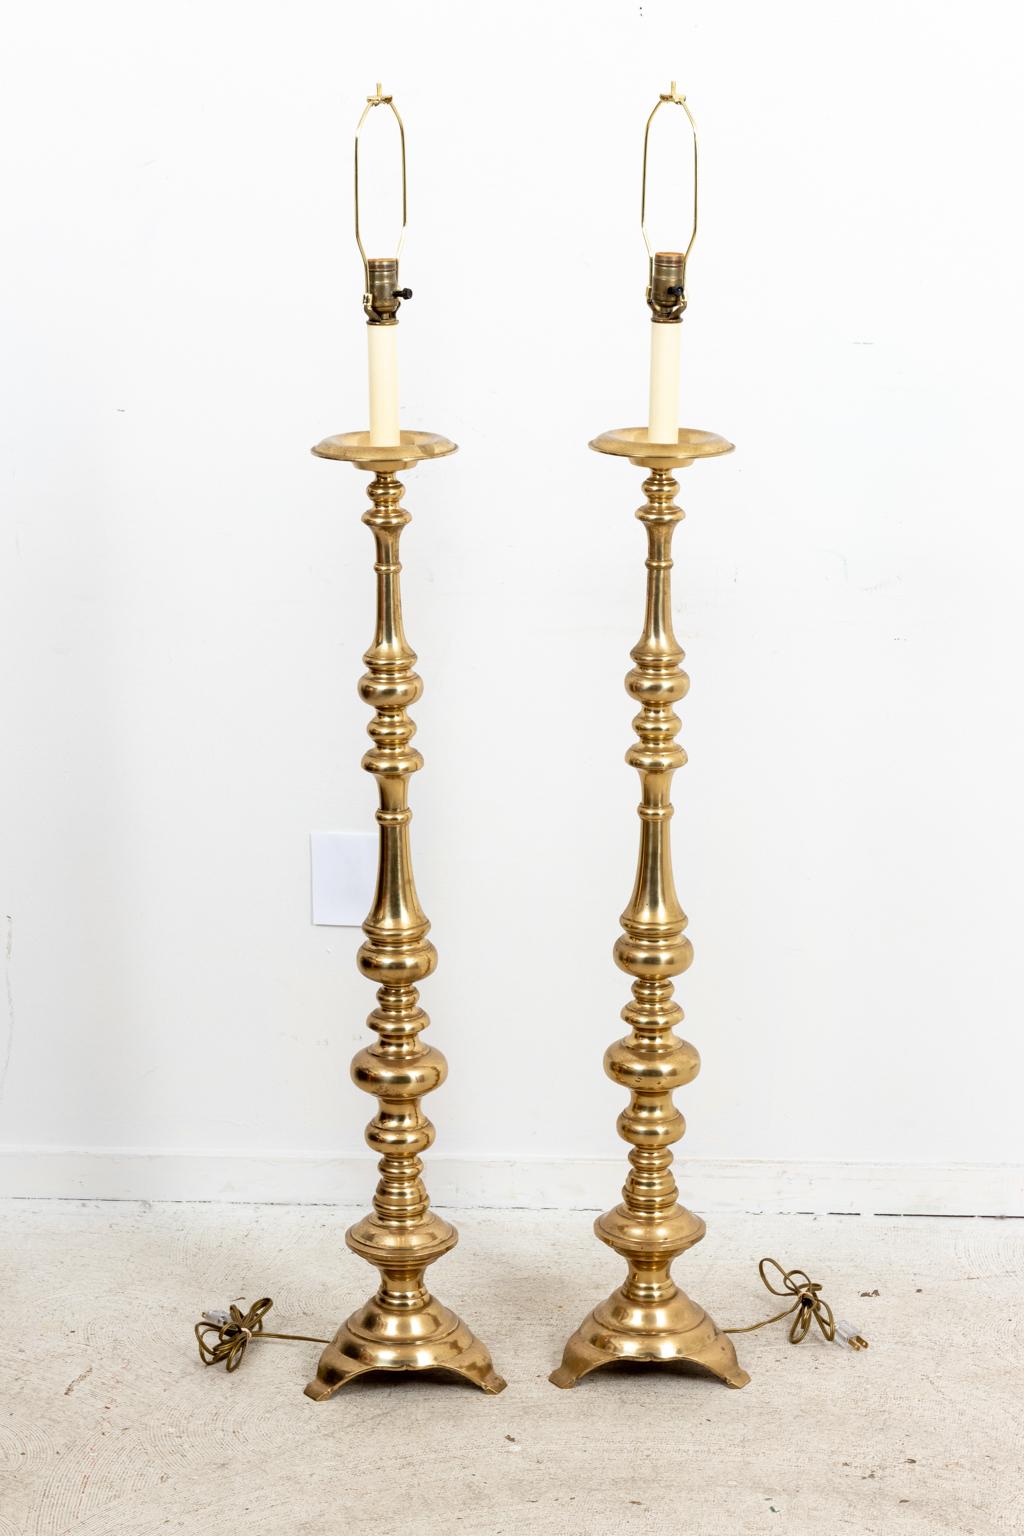 Circa 1960-1970s pair of Brass floor lamps in the Hollywood Regency style. The base measures 8.00 Inches by 8.00 Inches by 50.00 Inches. Please note of wear consistent with age. Shades not included.